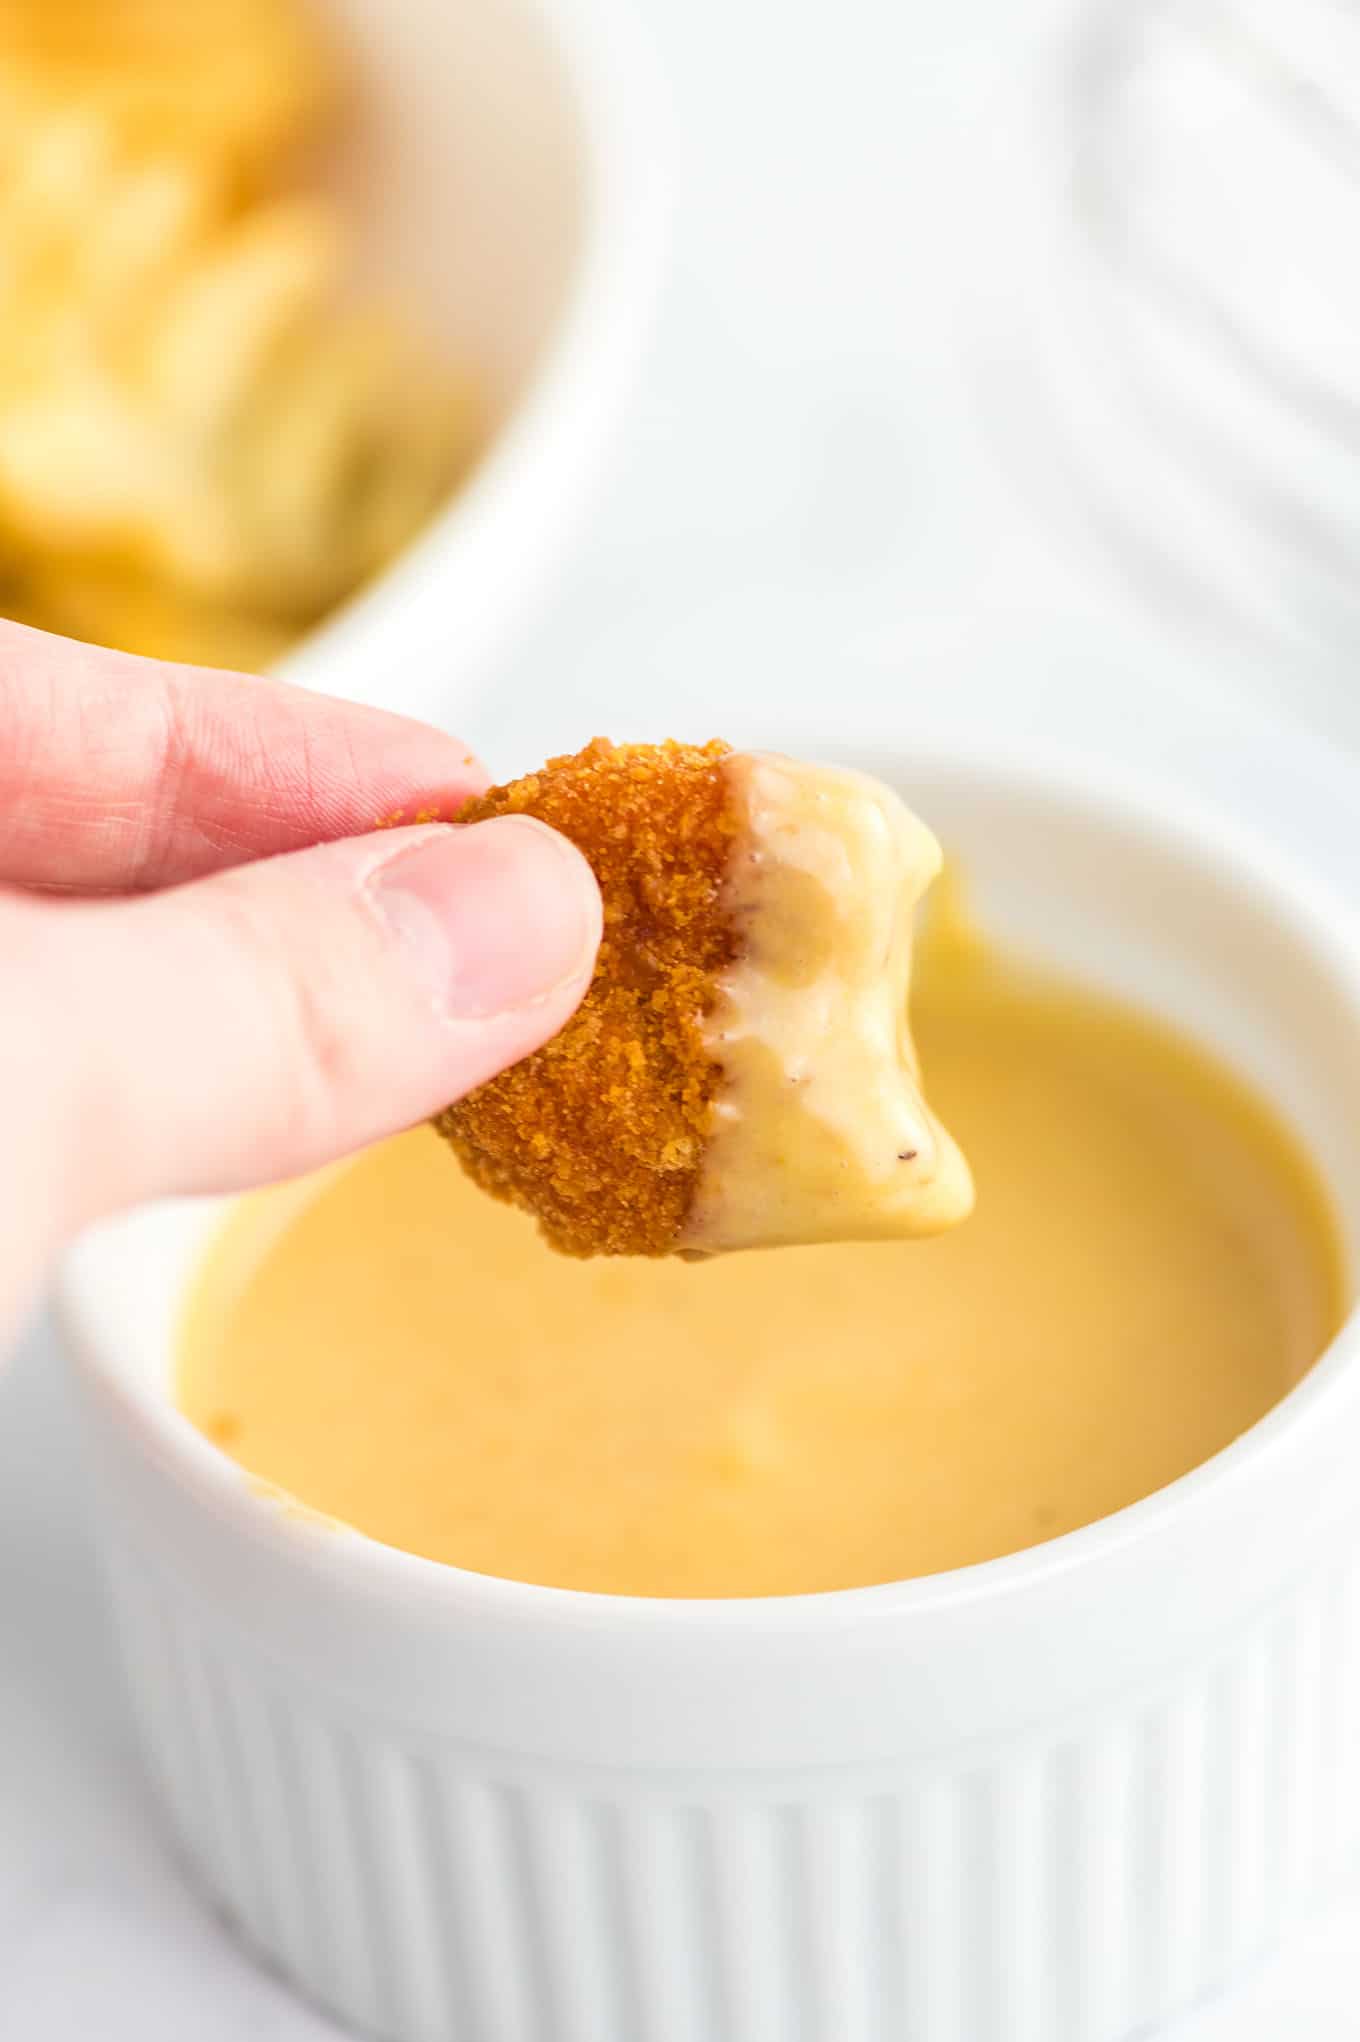 chicken nugget dipped in chick fil a sauce with a bite taken out